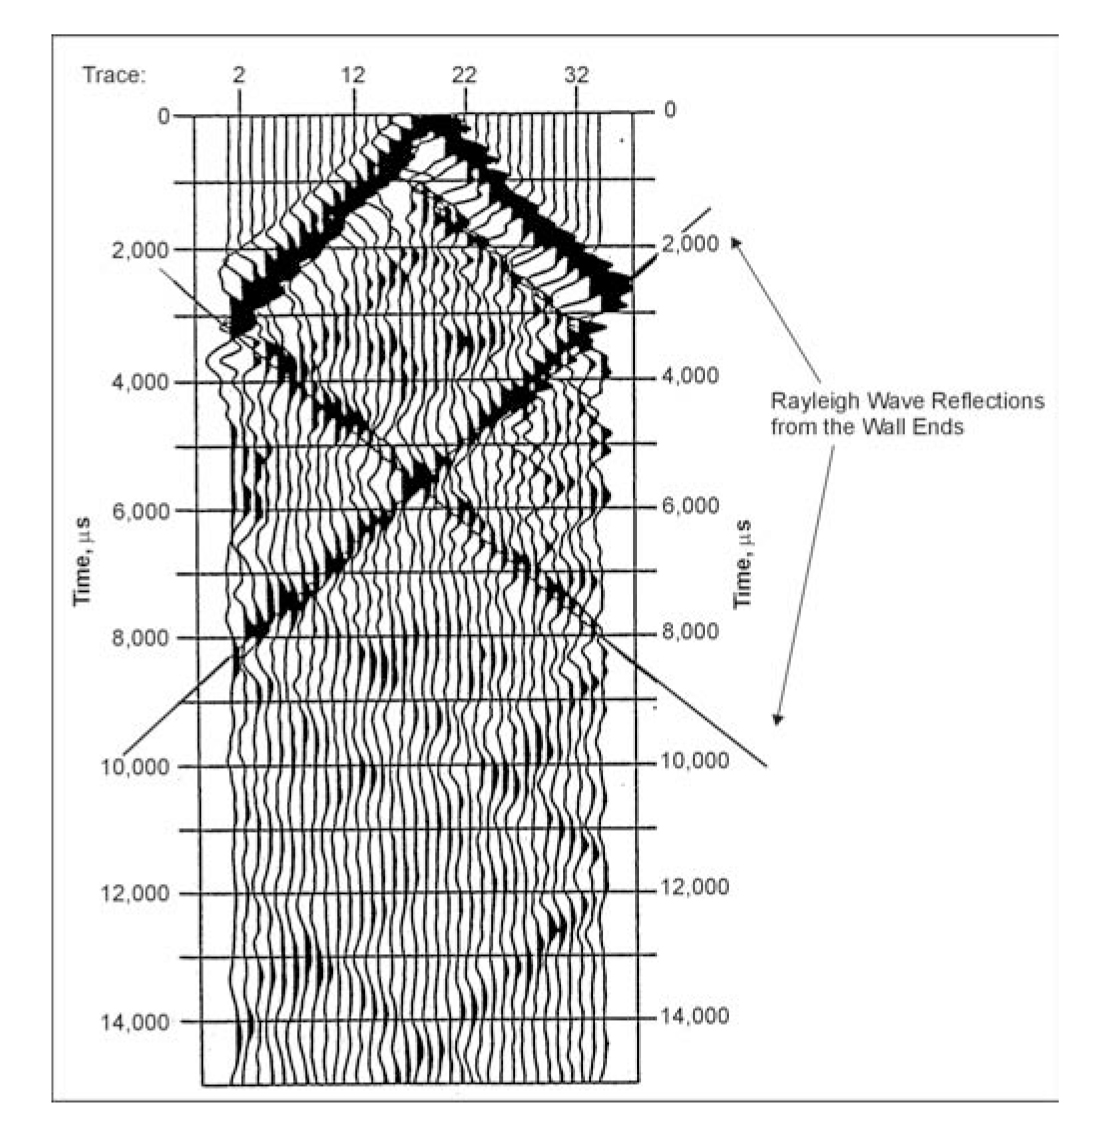 Example Ultraseismic-Horizontal Profiling dataset from a wall structure.